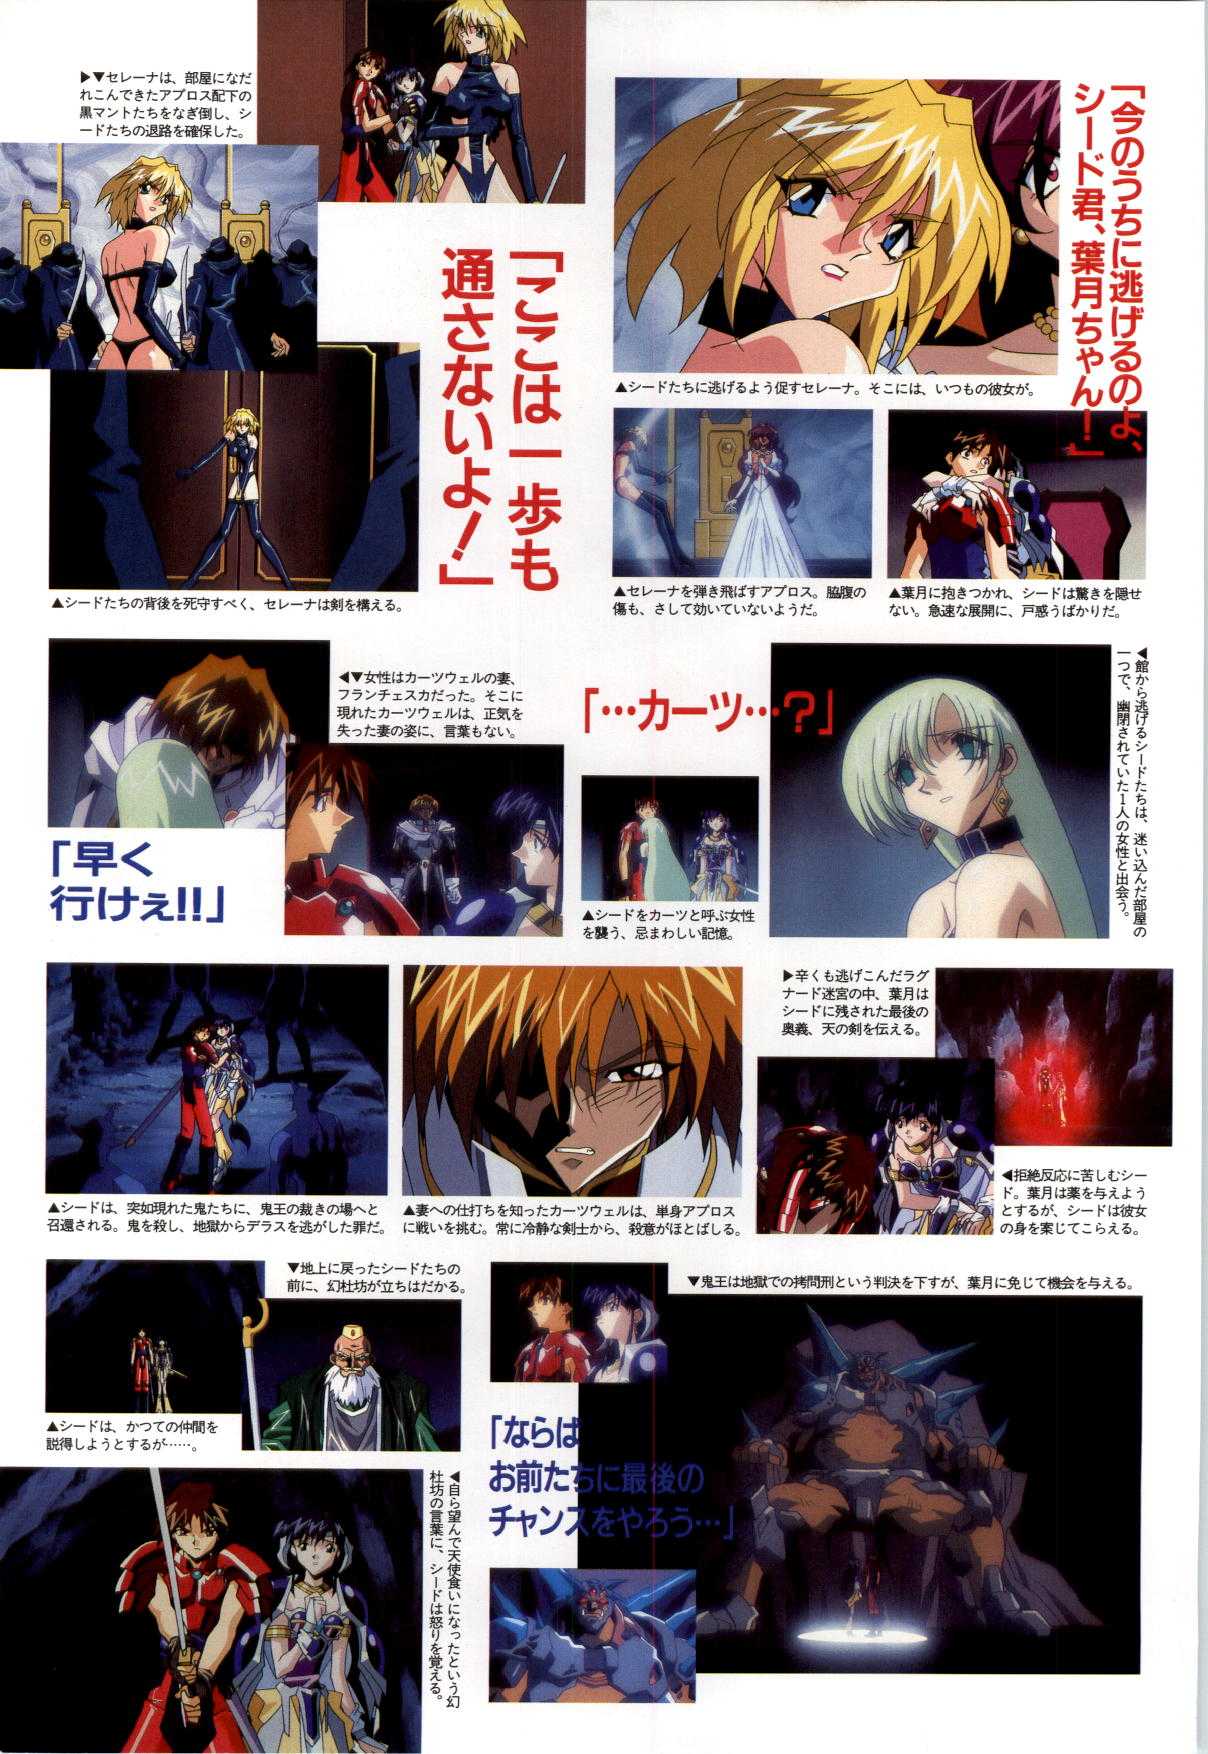 [Alice Soft] Toushin Toshi 2 - Original Animation Video (KSS perfect collection series) [アリスソフト] 闘神都市II―Original animation video (KSS perfect collection series)